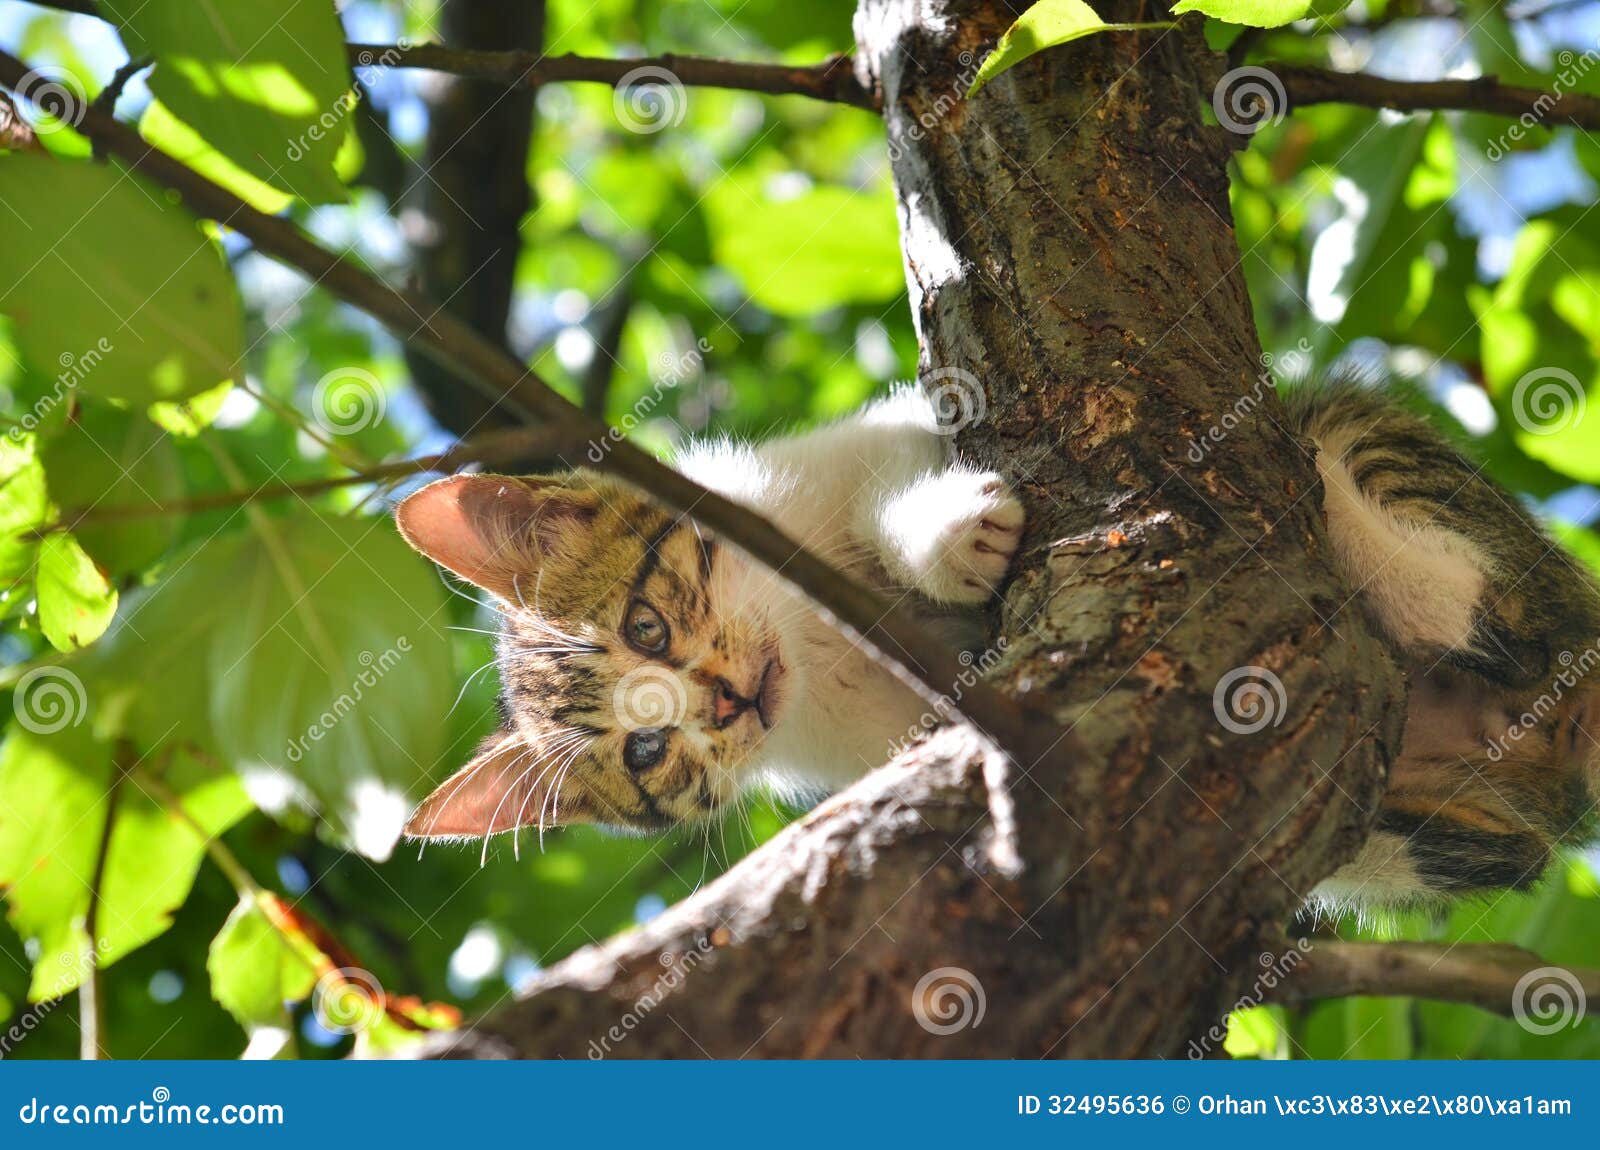 clipart cat in tree - photo #34